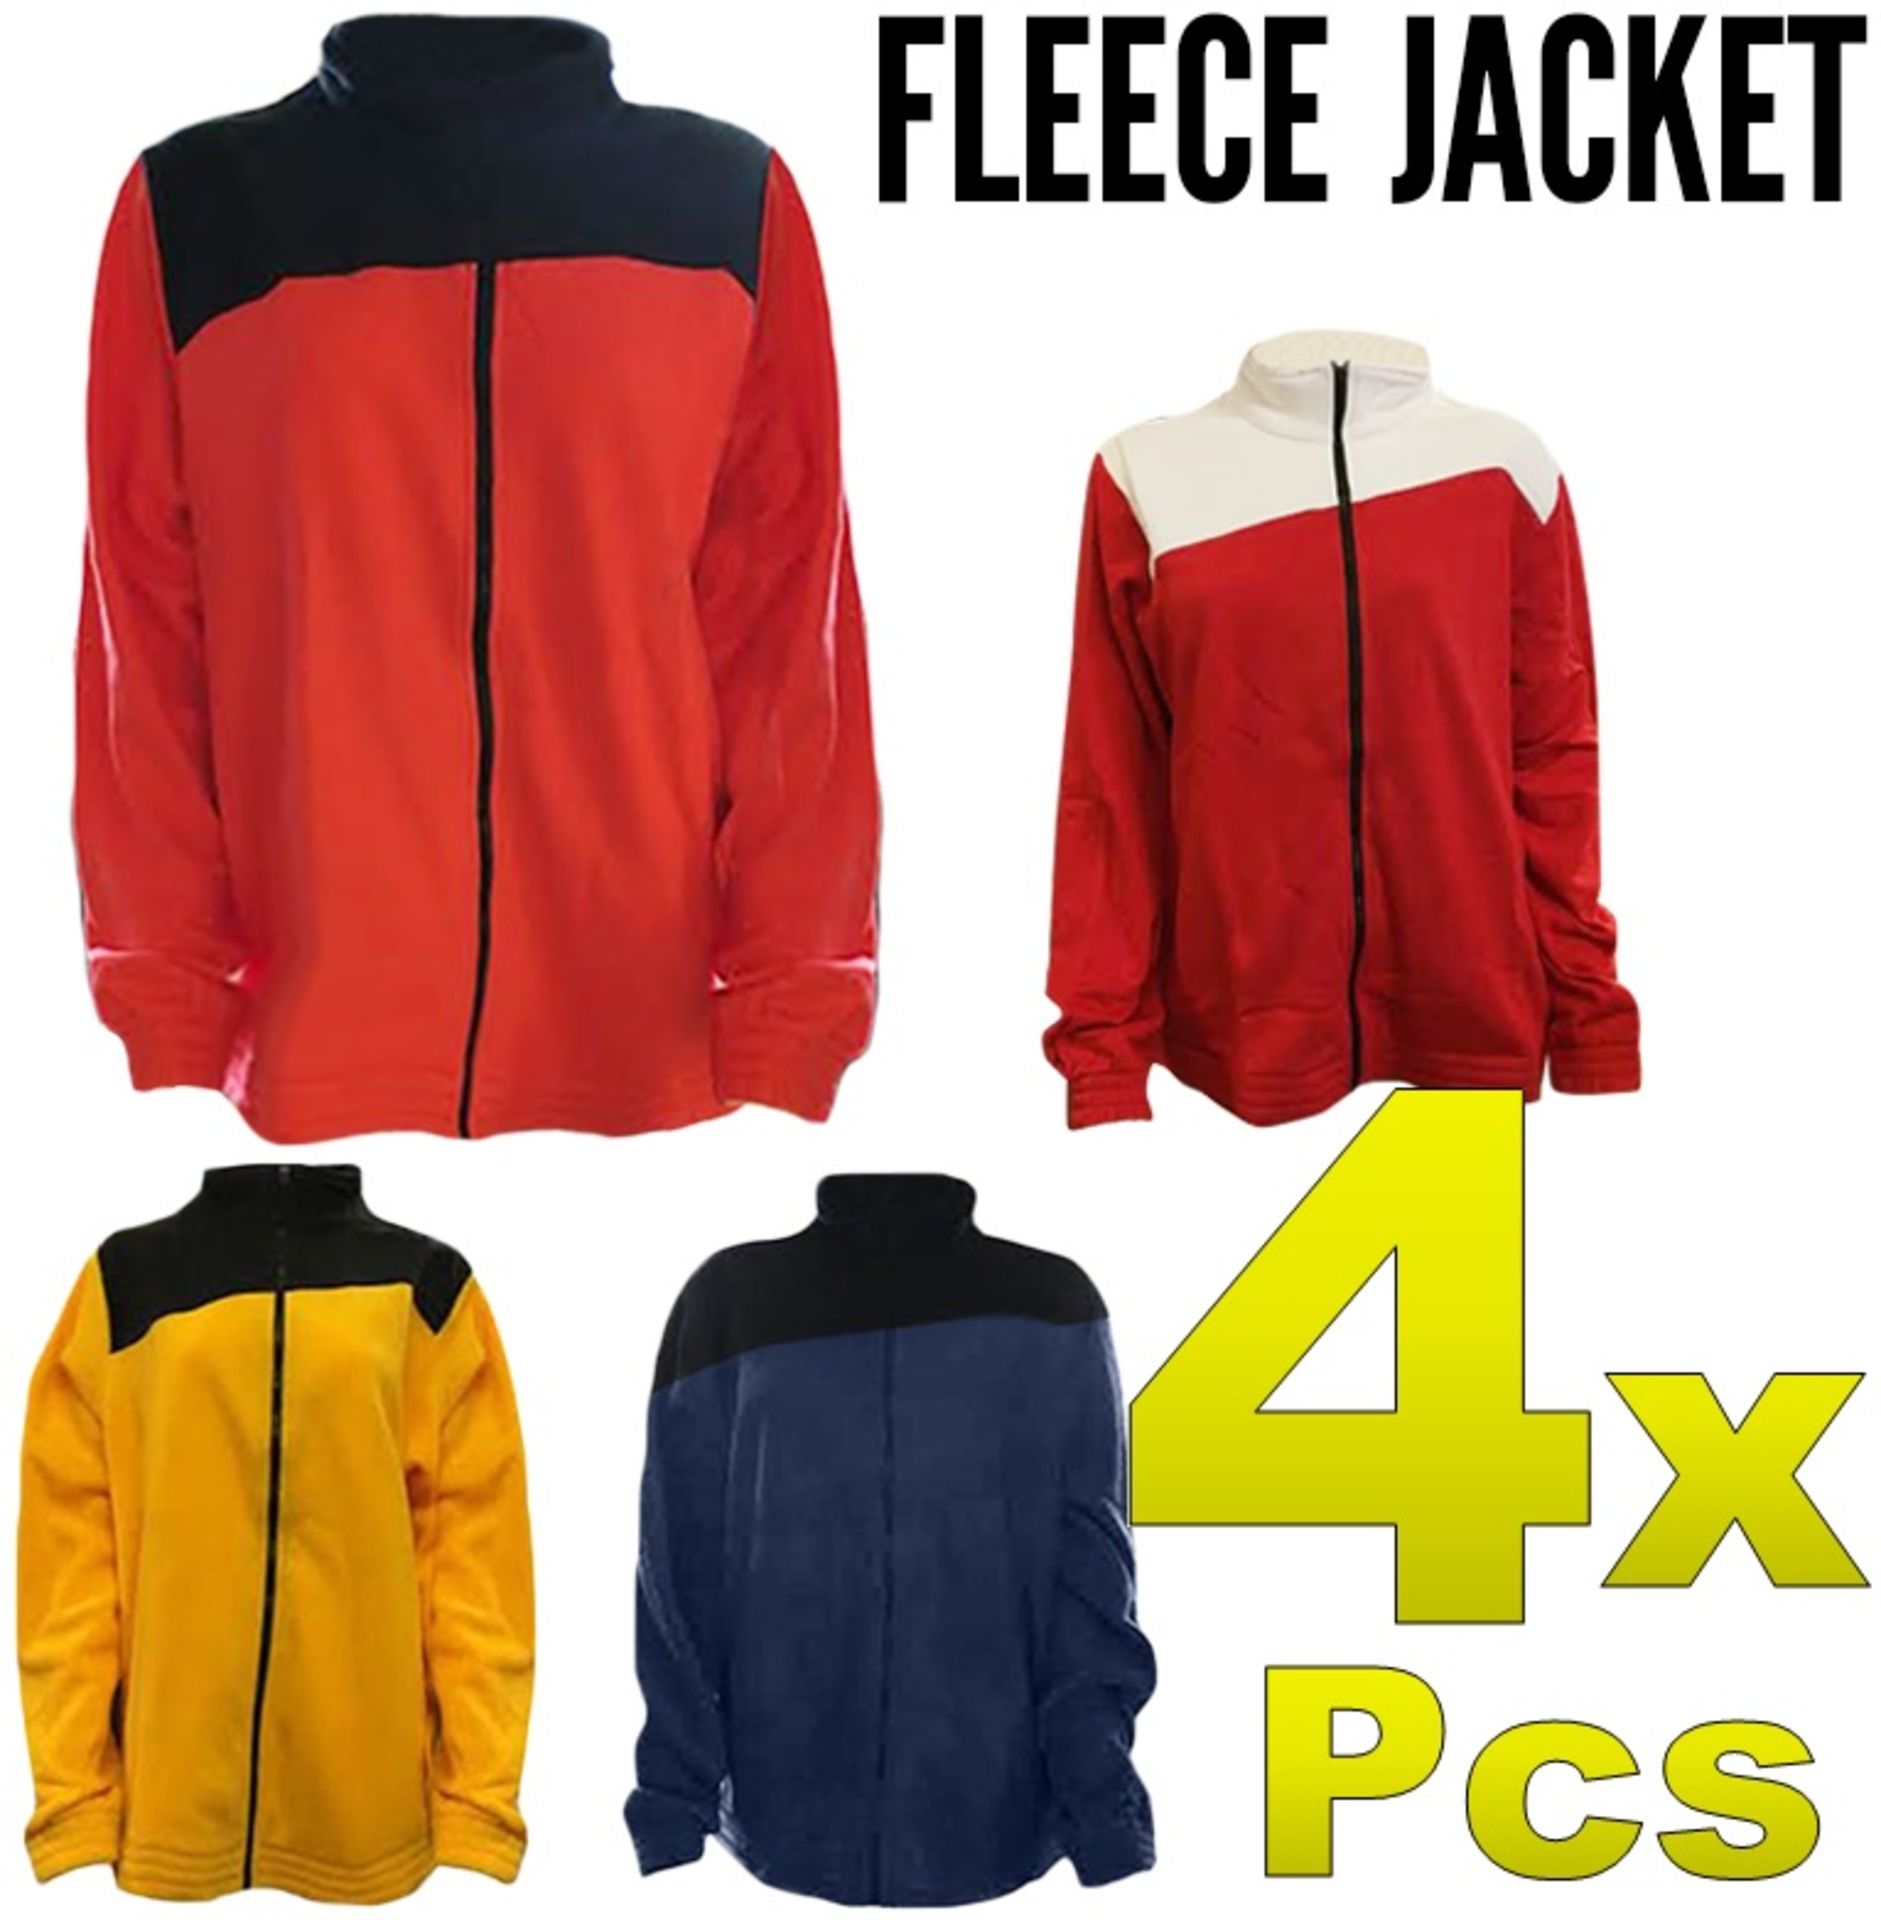 4x Fleece Jacket with Zip Closure and Large Pockets suitable for Hiking Camping Summer Holiday -